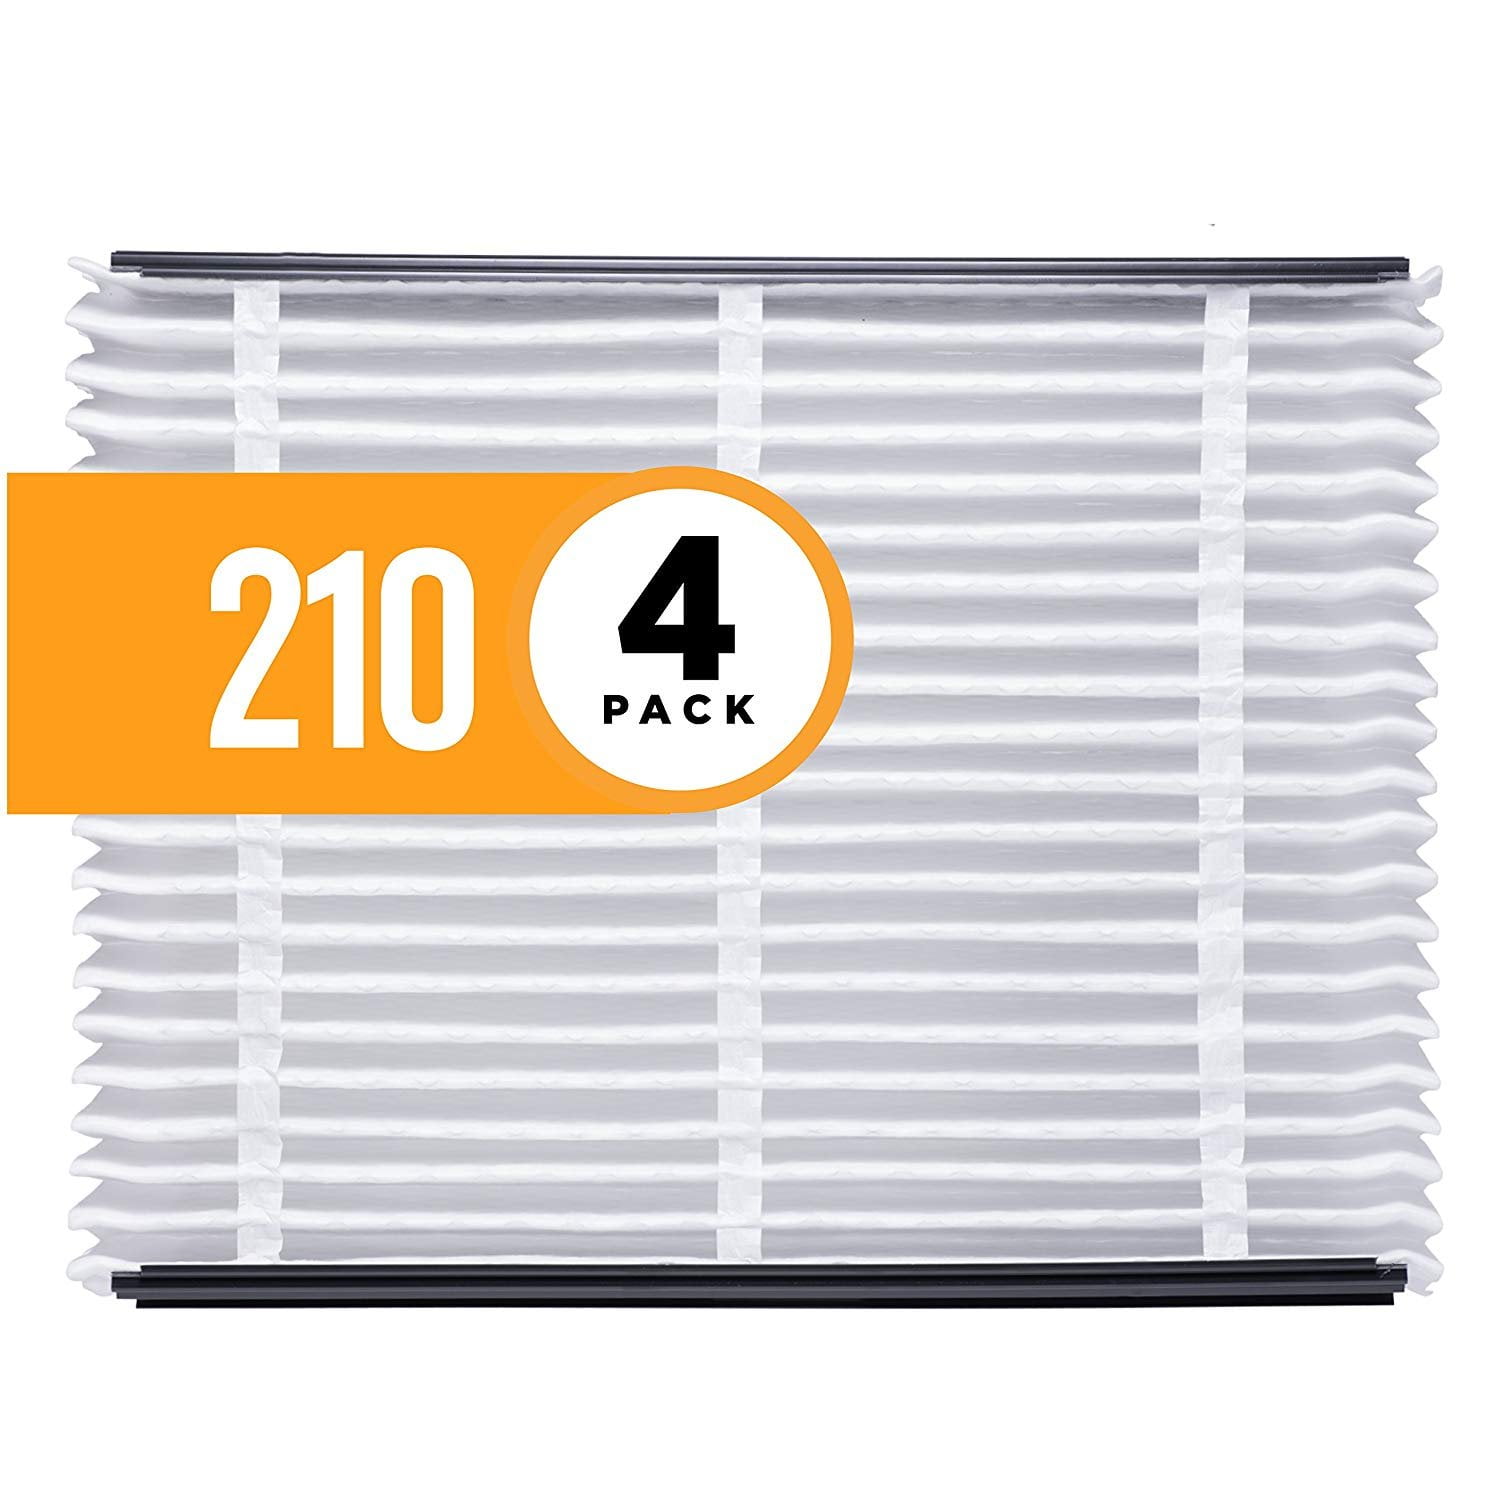 4200 2210 Aprilaire 210 Filter Single Pack for Air Purifier Models 1210 3210 